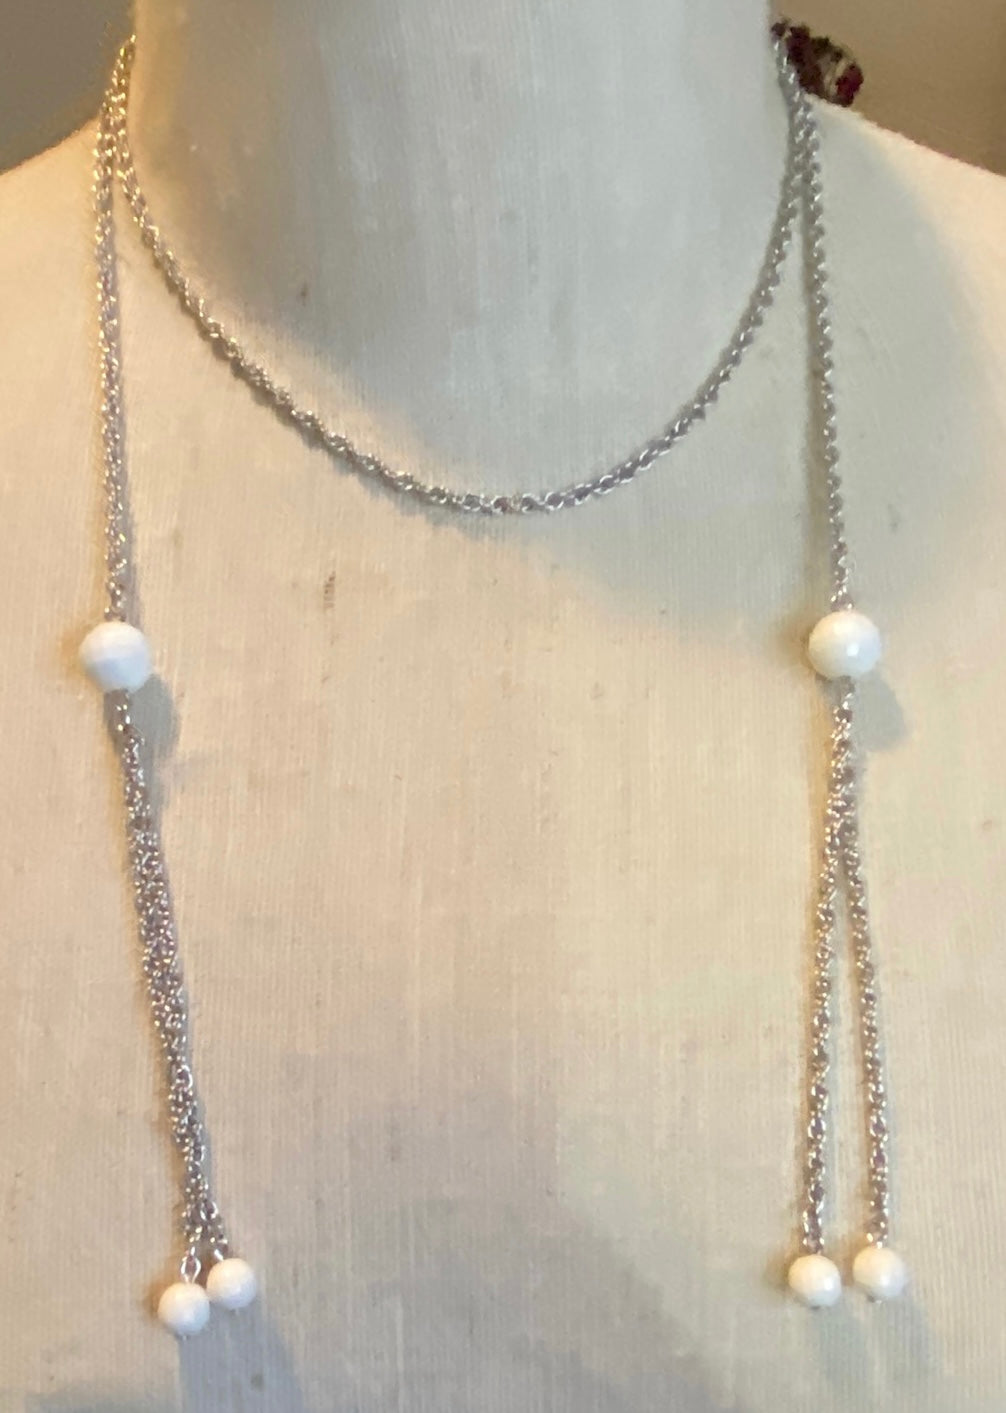 Silver Tone Chain Link White Faceted Bead Wrap Necklace